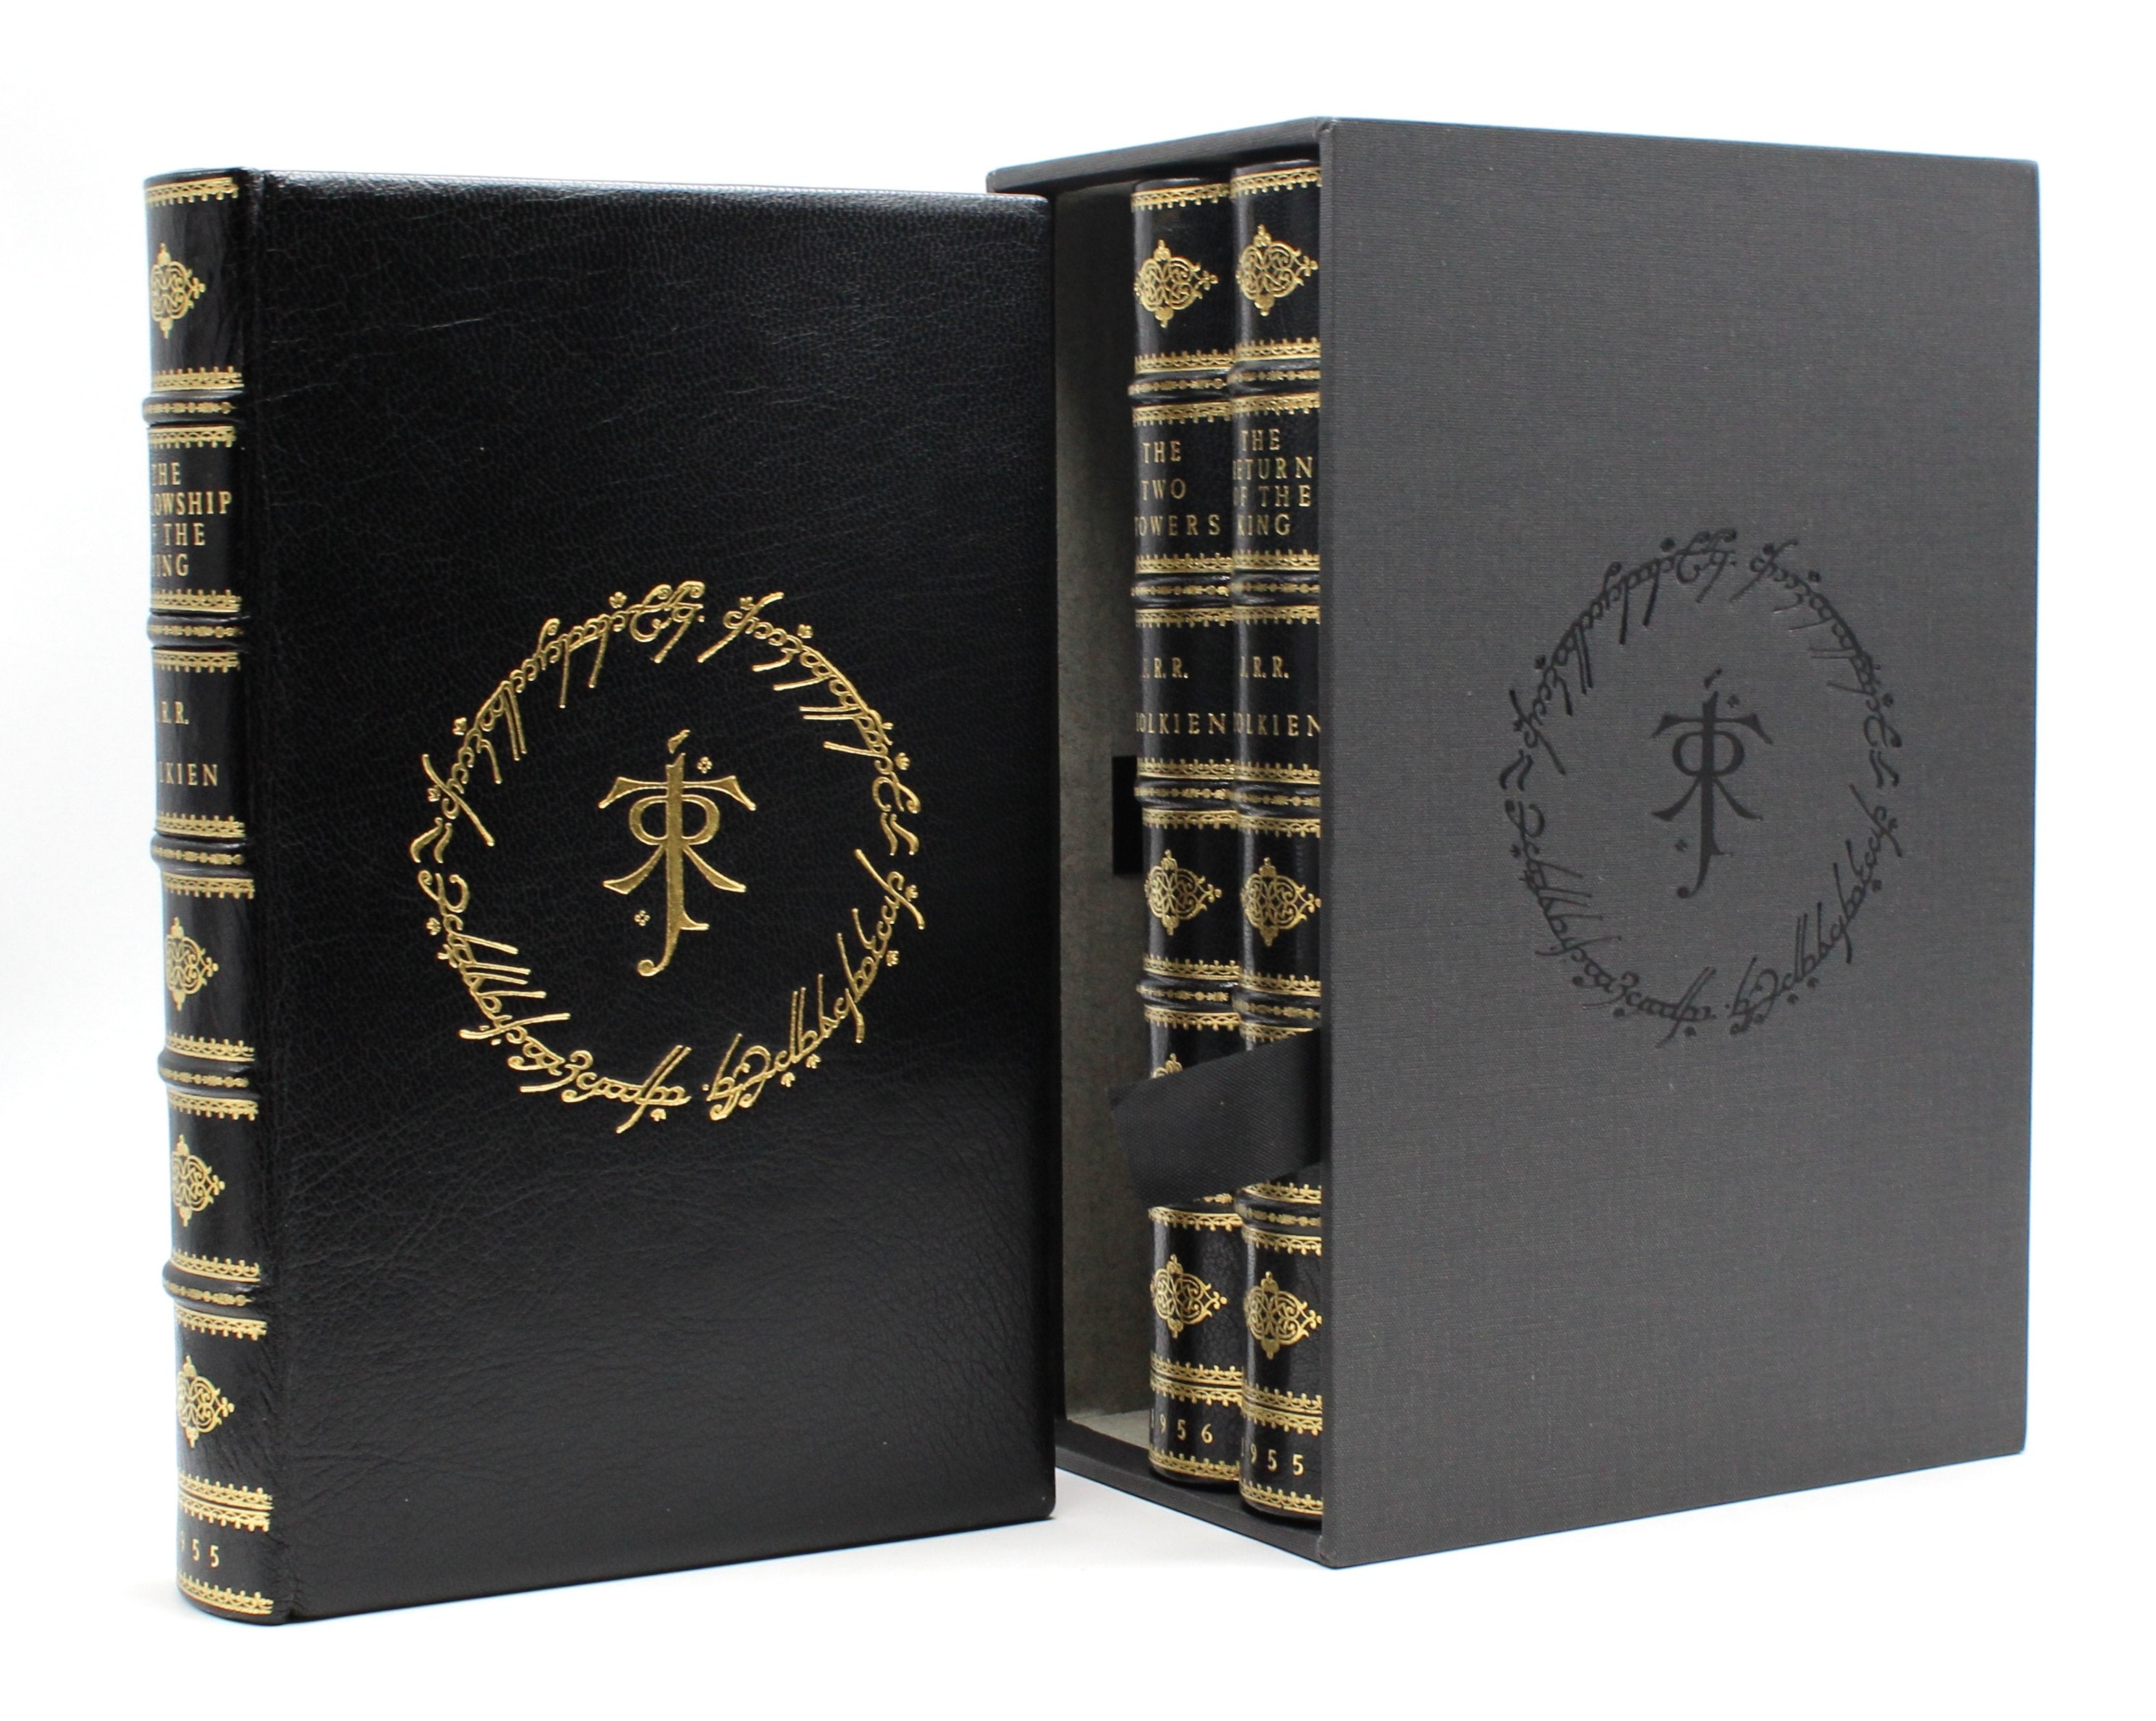 Rare First Edition Set of The Lord of the Rings